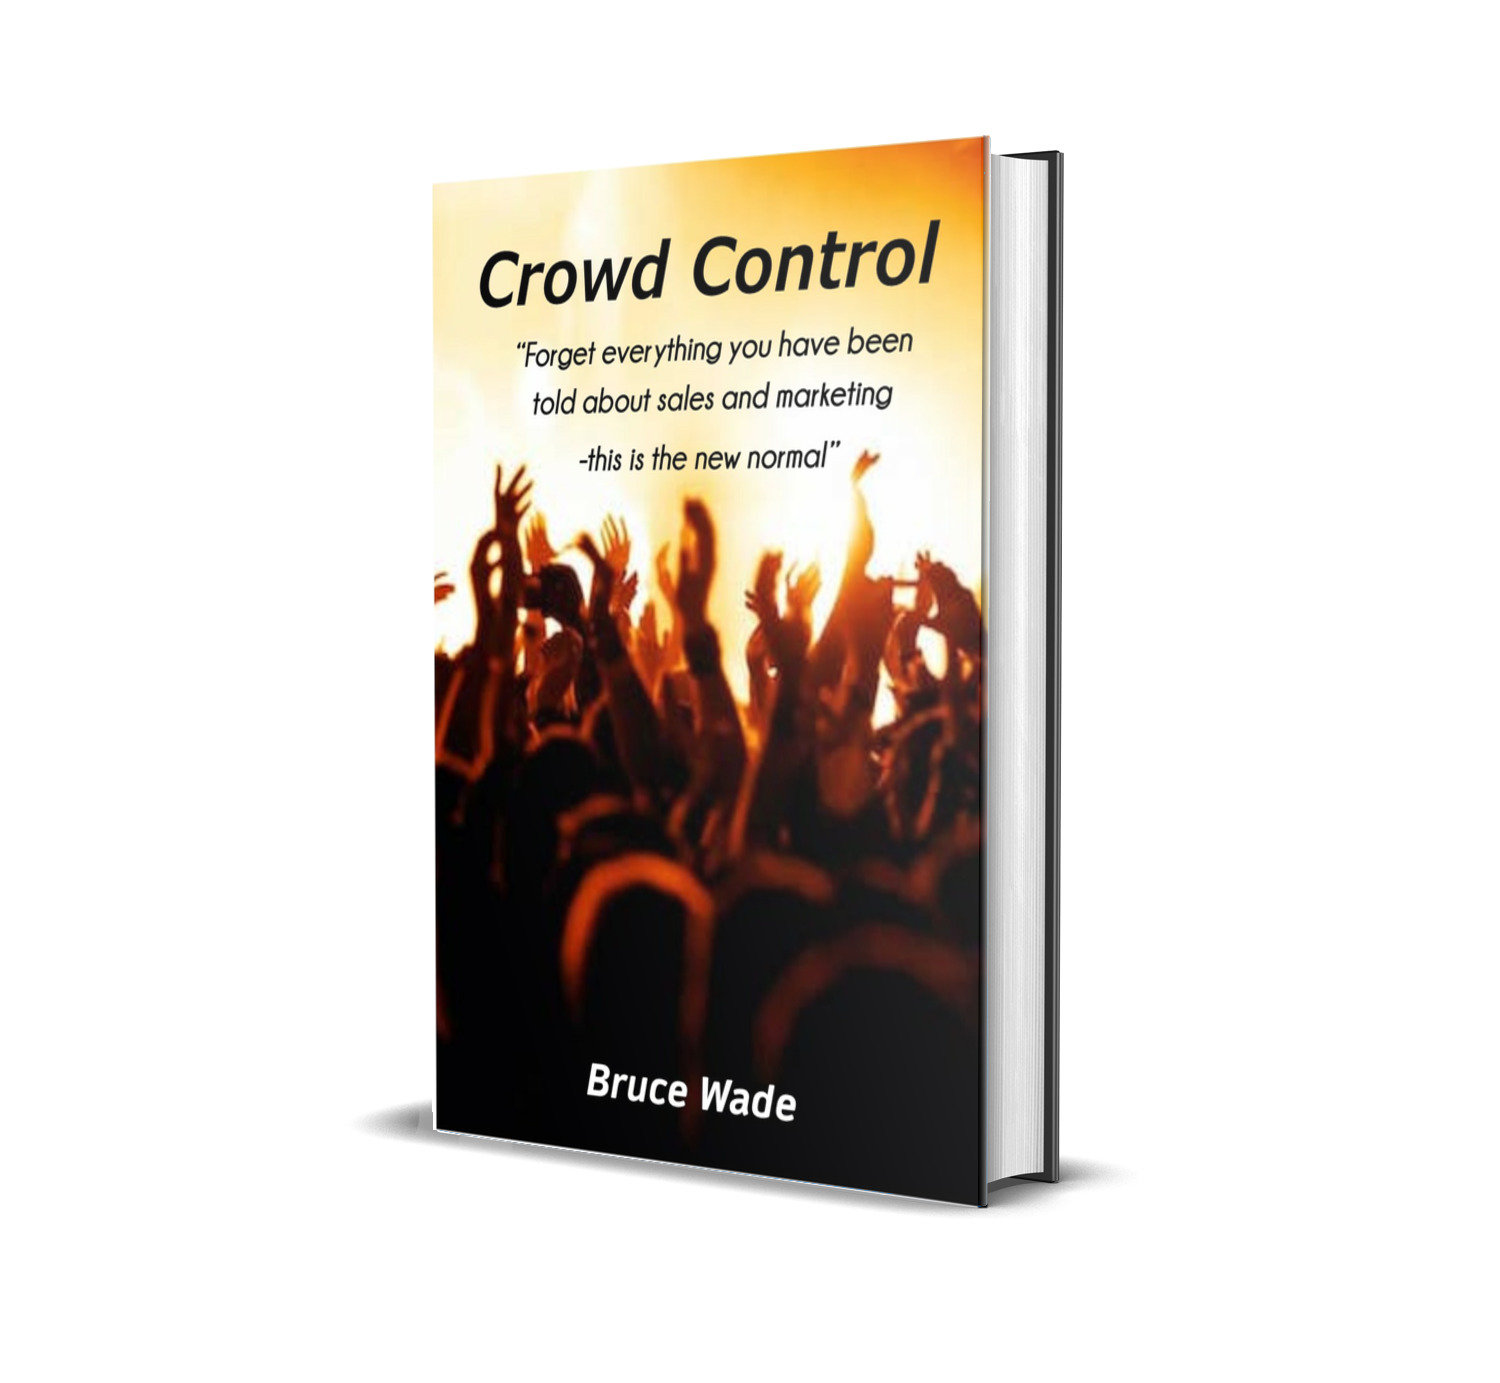 Controlling crowds